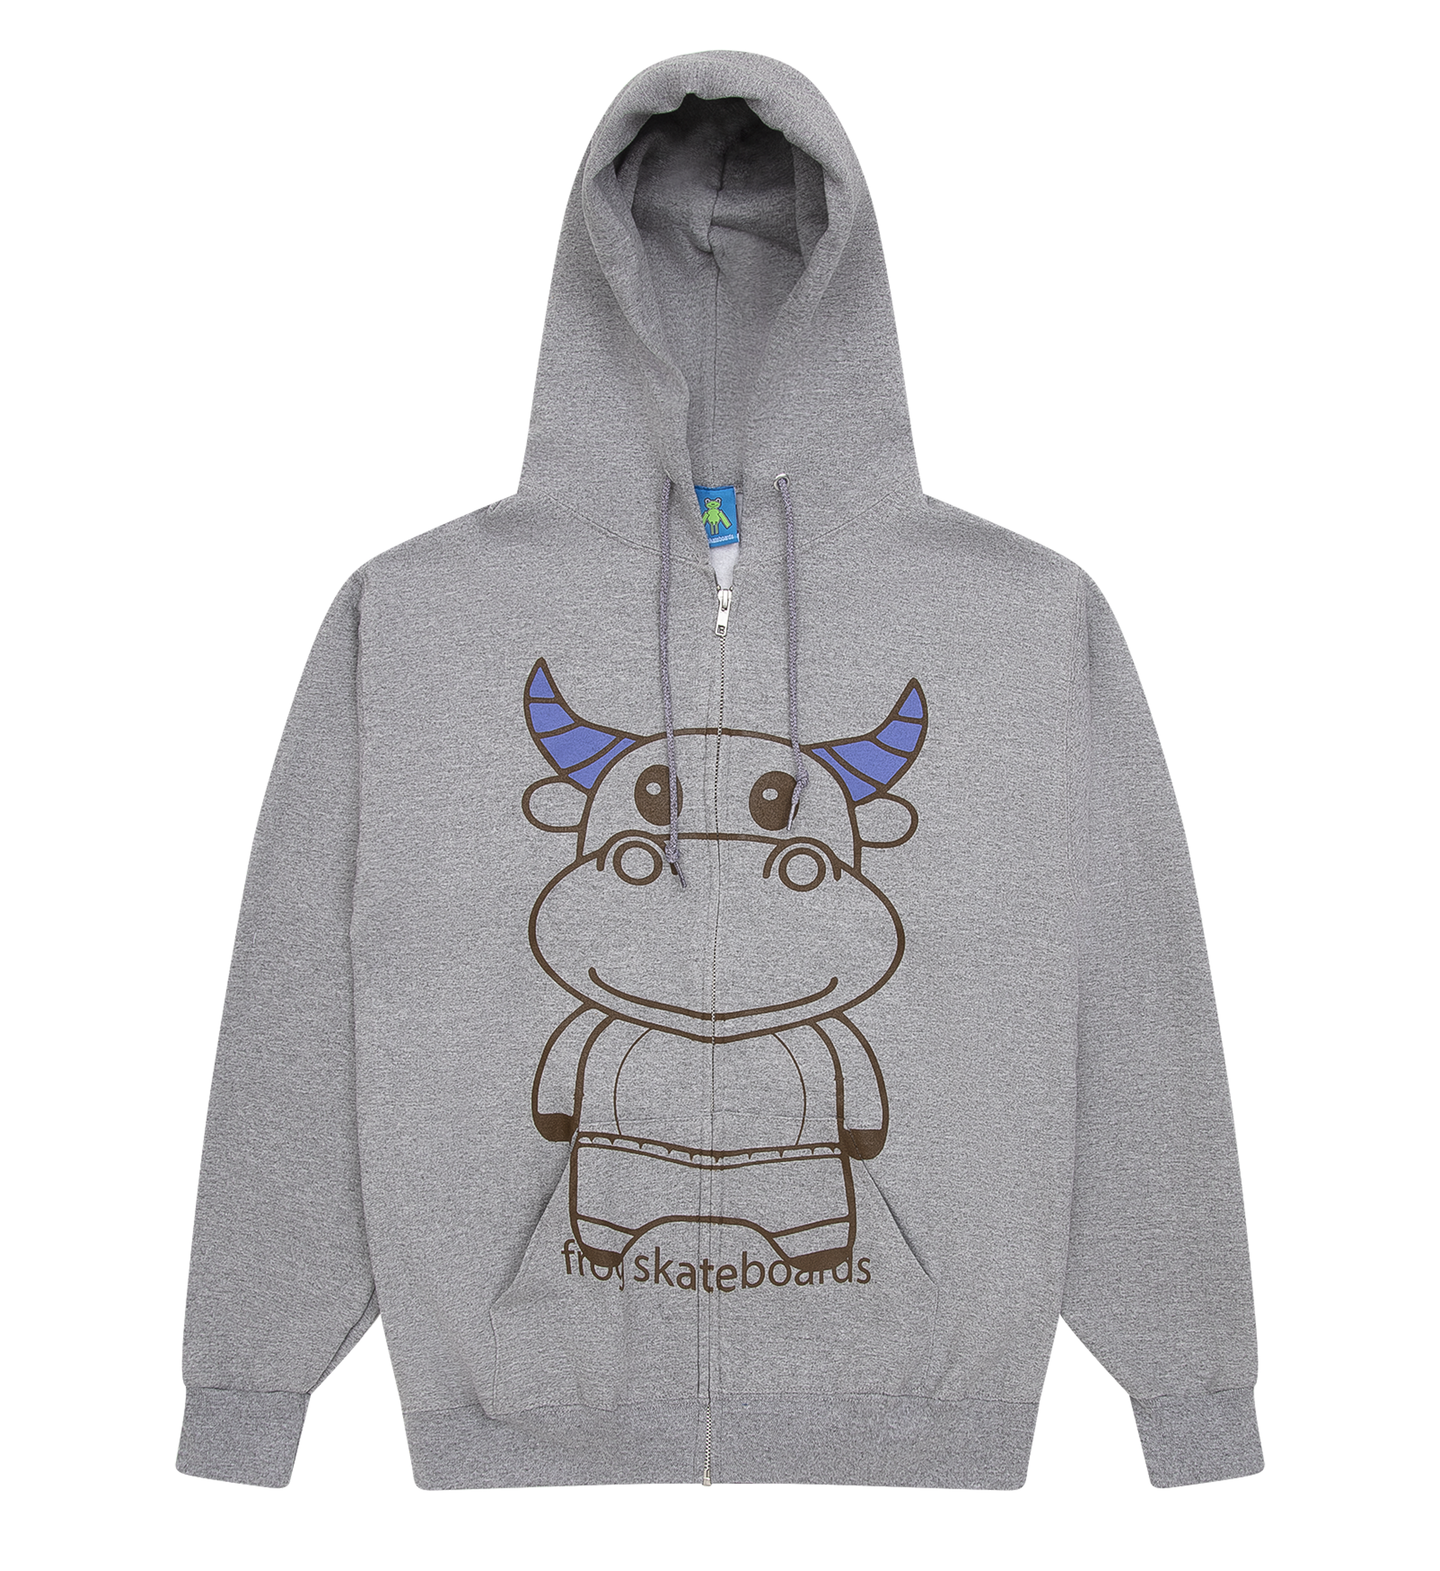 Totally Awesome Zip Hoodie (Athletic Grey)